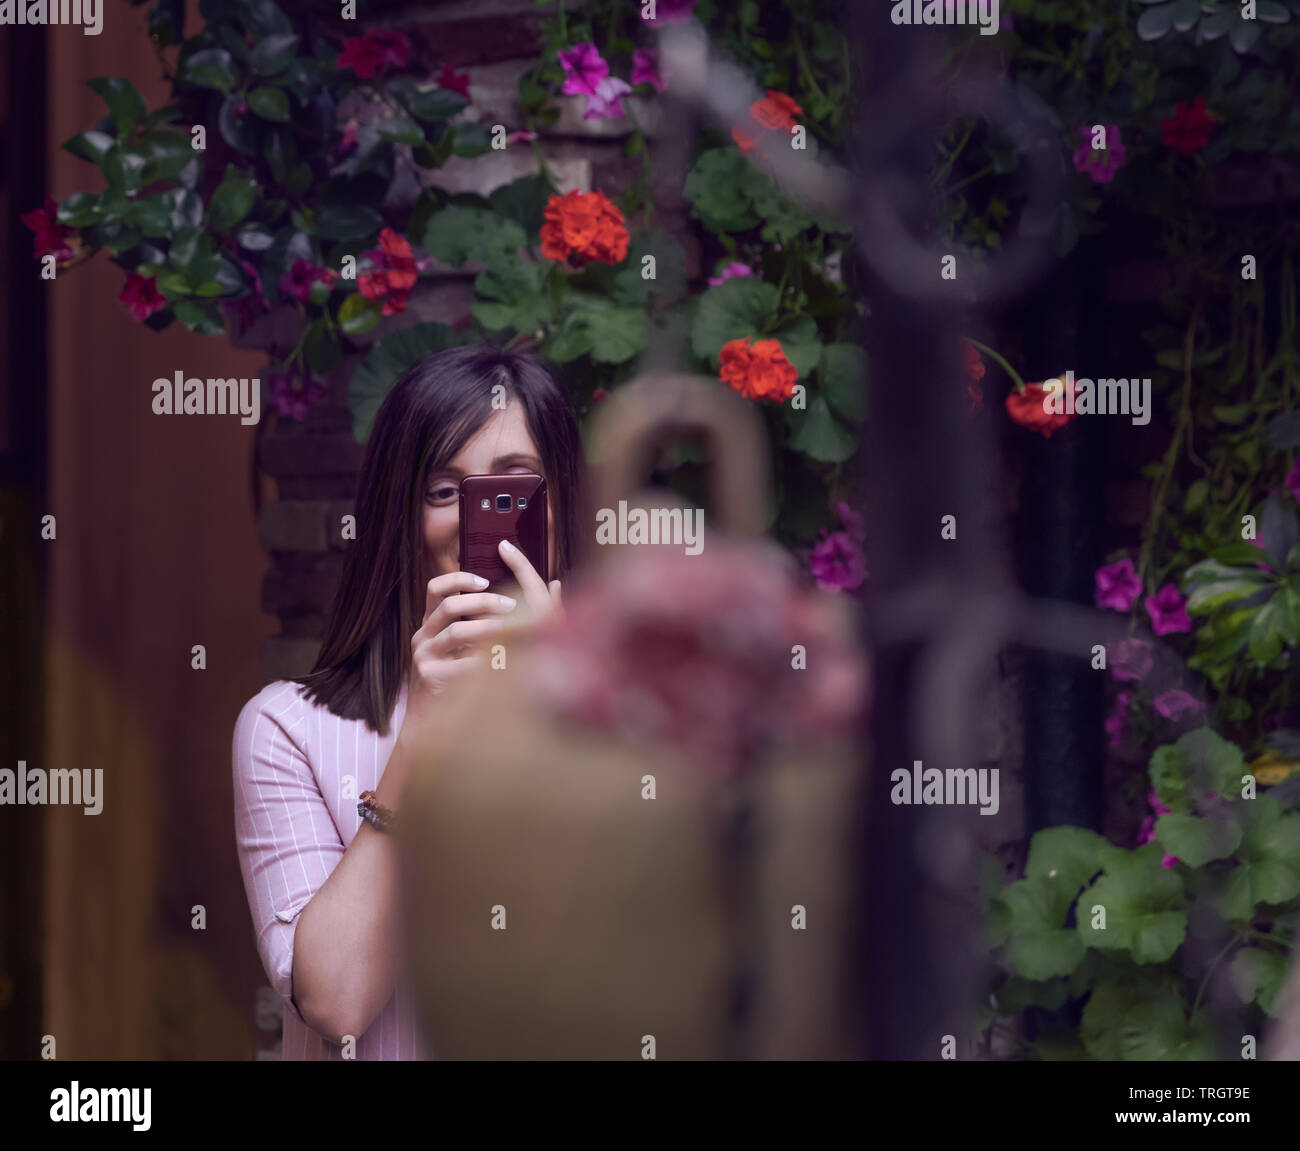 Cordoba, Spain - May 16, 2019: A young woman taking a photo with her mobile in a flowery environment Stock Photo